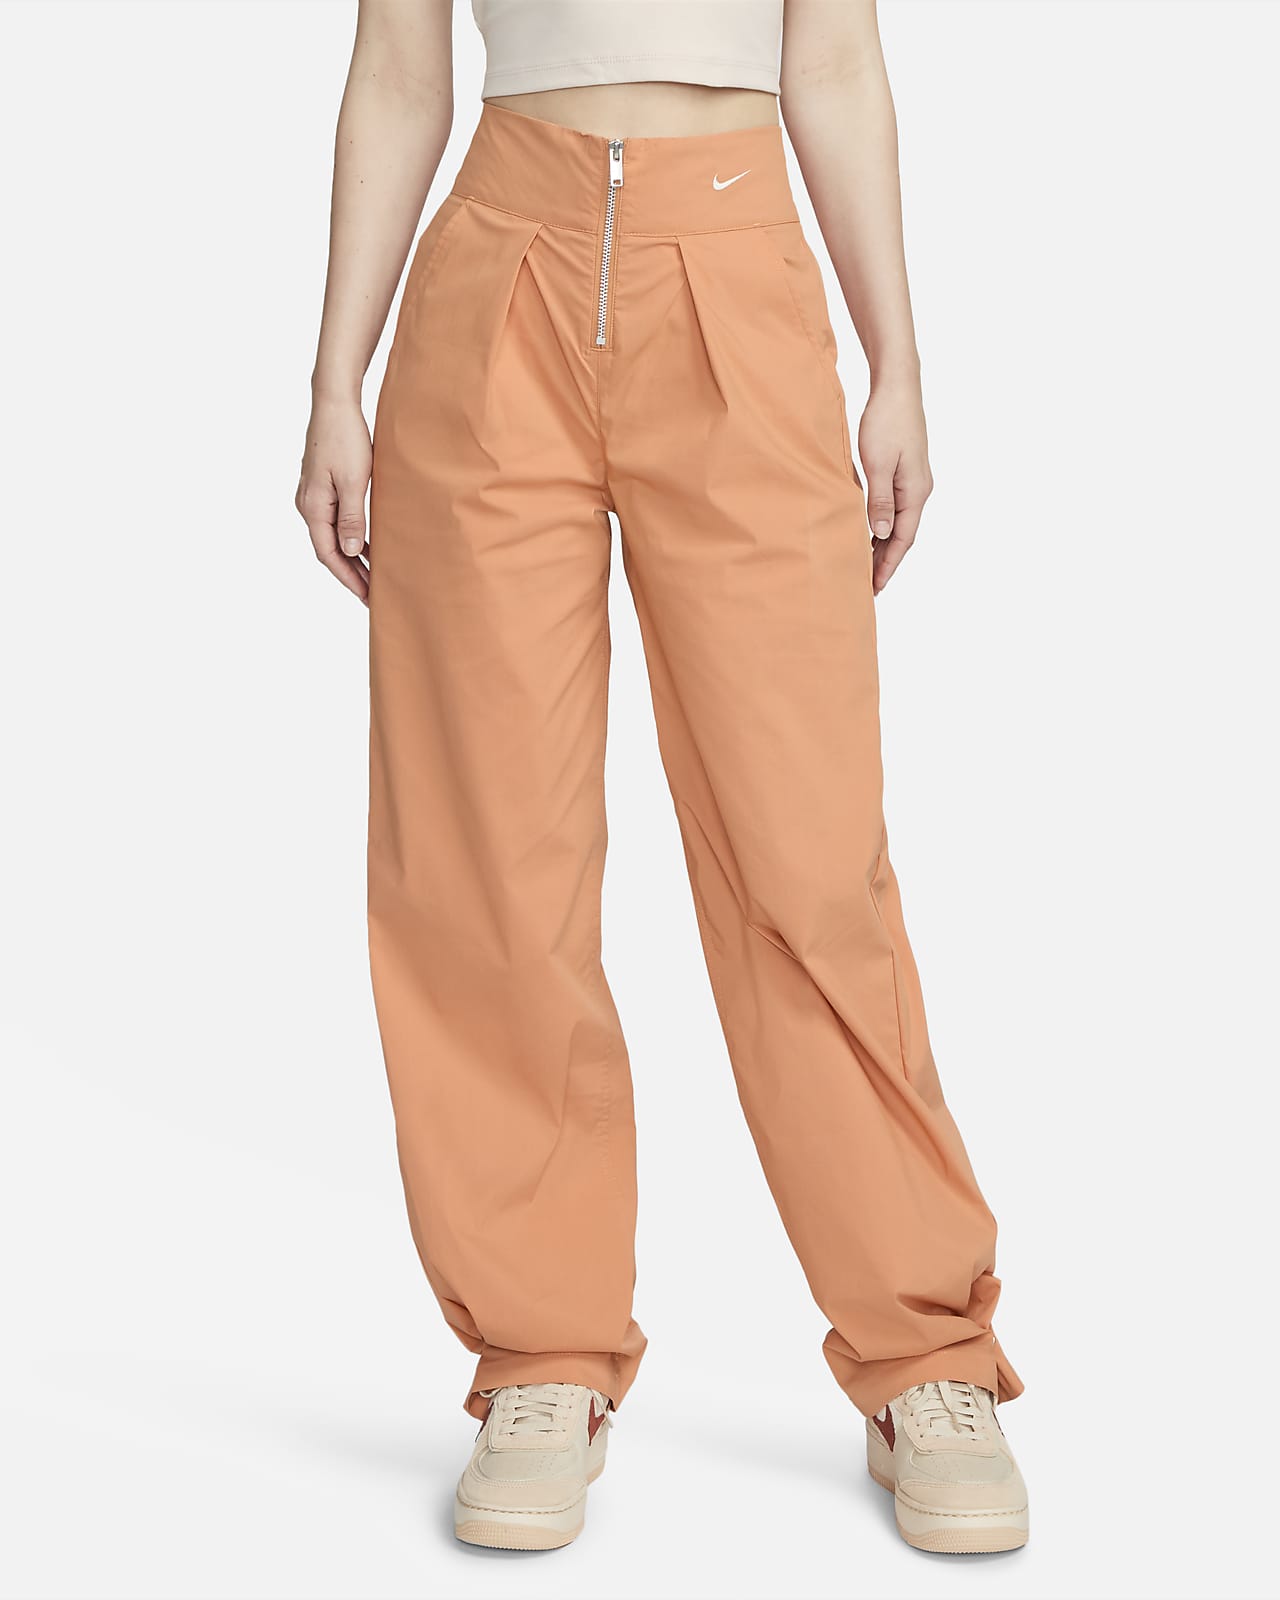 https://static.nike.com/a/images/t_PDP_1280_v1/f_auto,q_auto:eco/0057e66b-879c-4699-8ee9-54d88c16b16e/pants-de-tejido-woven-sportswear-collection-5sw089.png